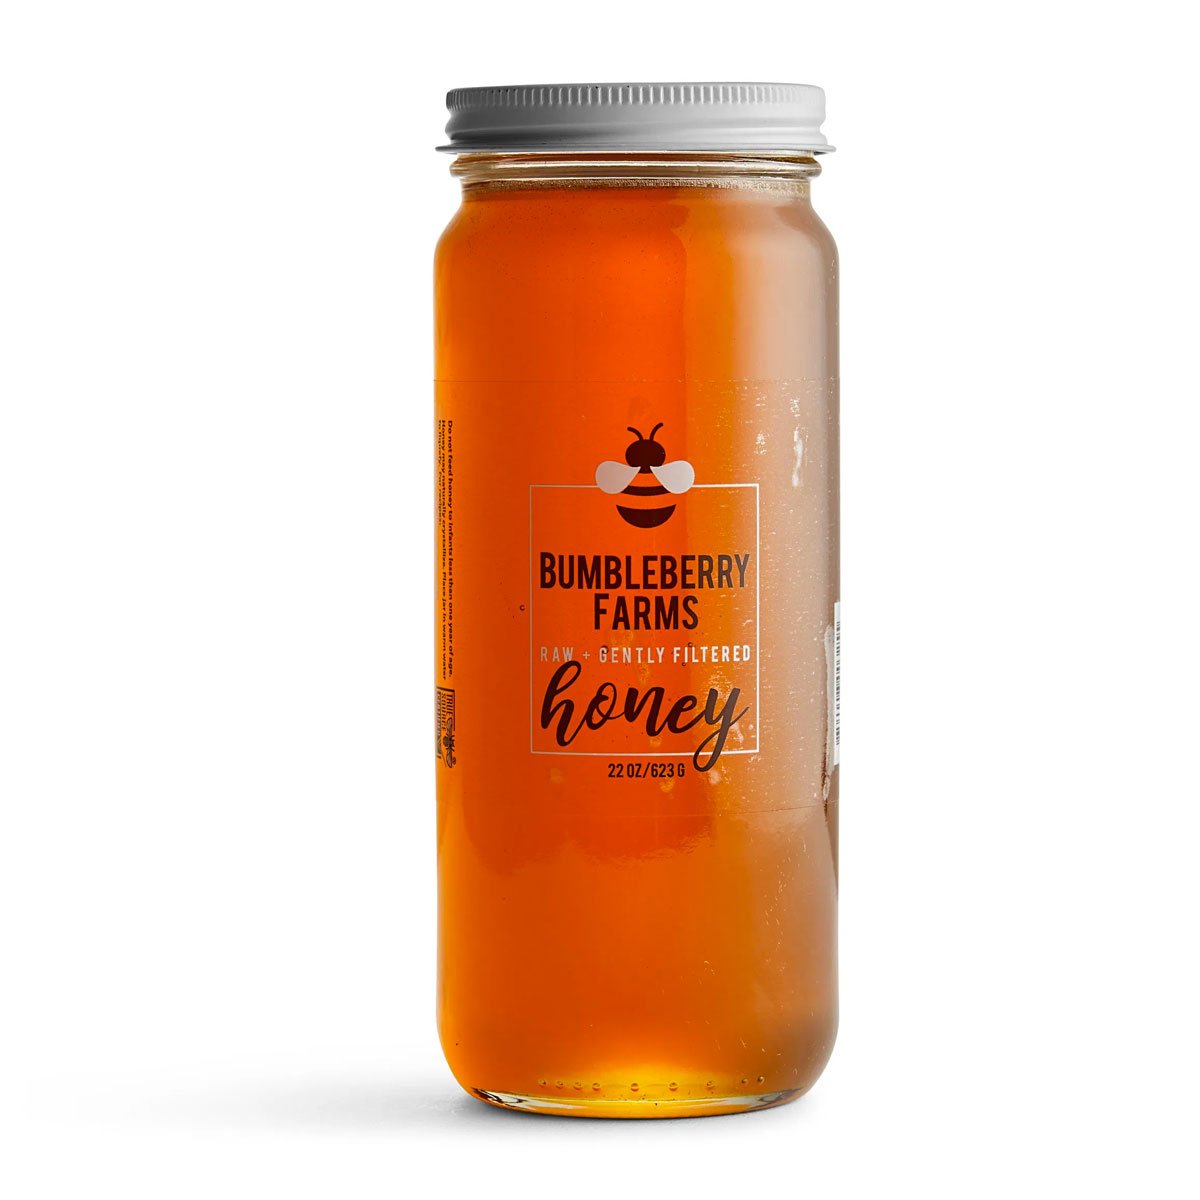 Raw + Gently Filtered Honey